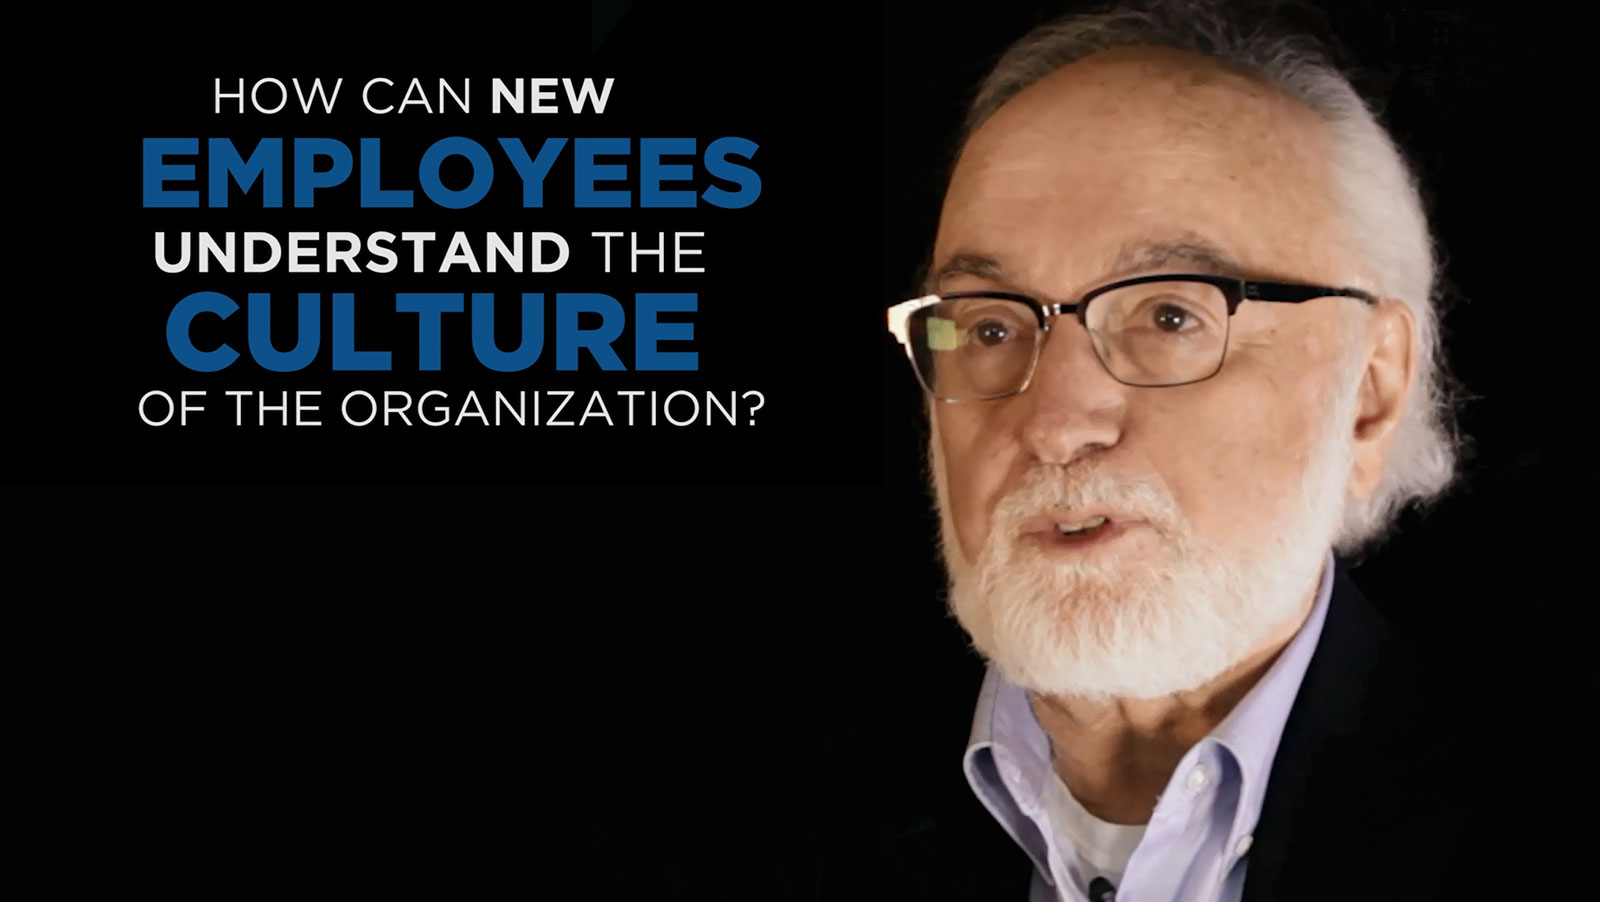 Shared Experience – How can new employees understand the culture of the organization?